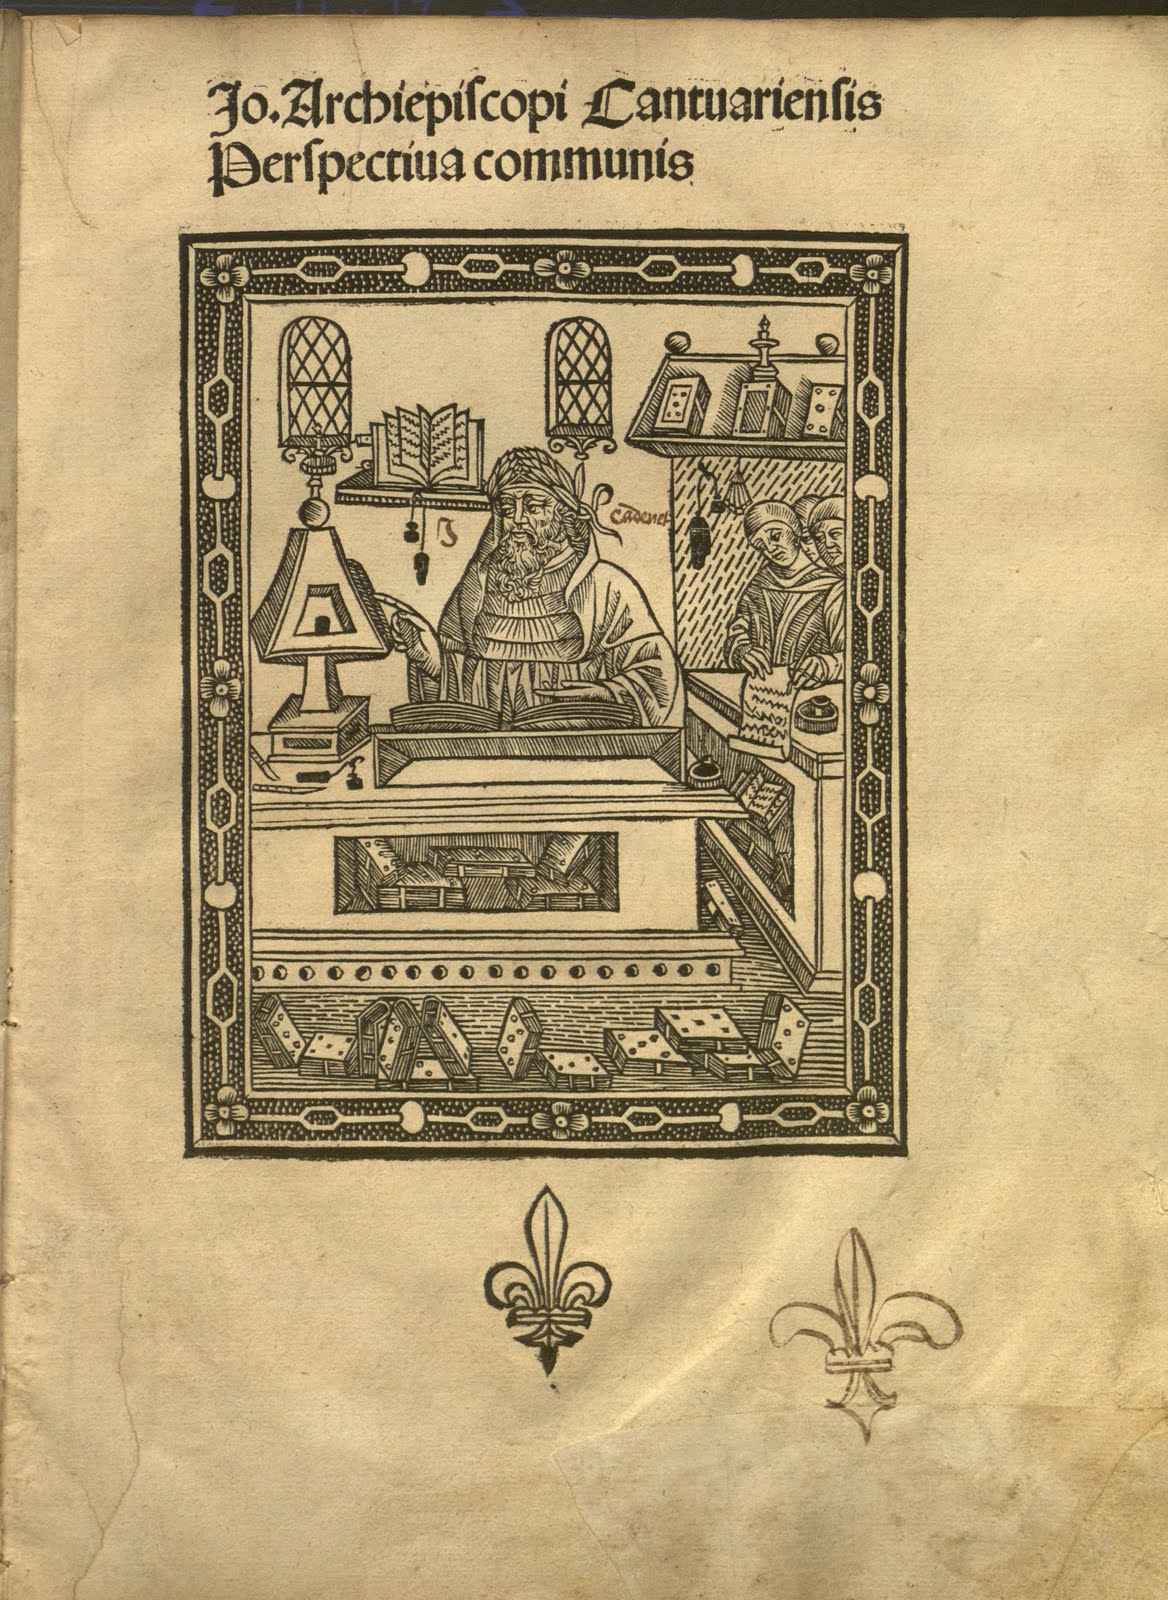 Full-page title illustration of John Cantuarensis at his desk studying a scientific instrument as he dictates his discoveries to several scribes. 